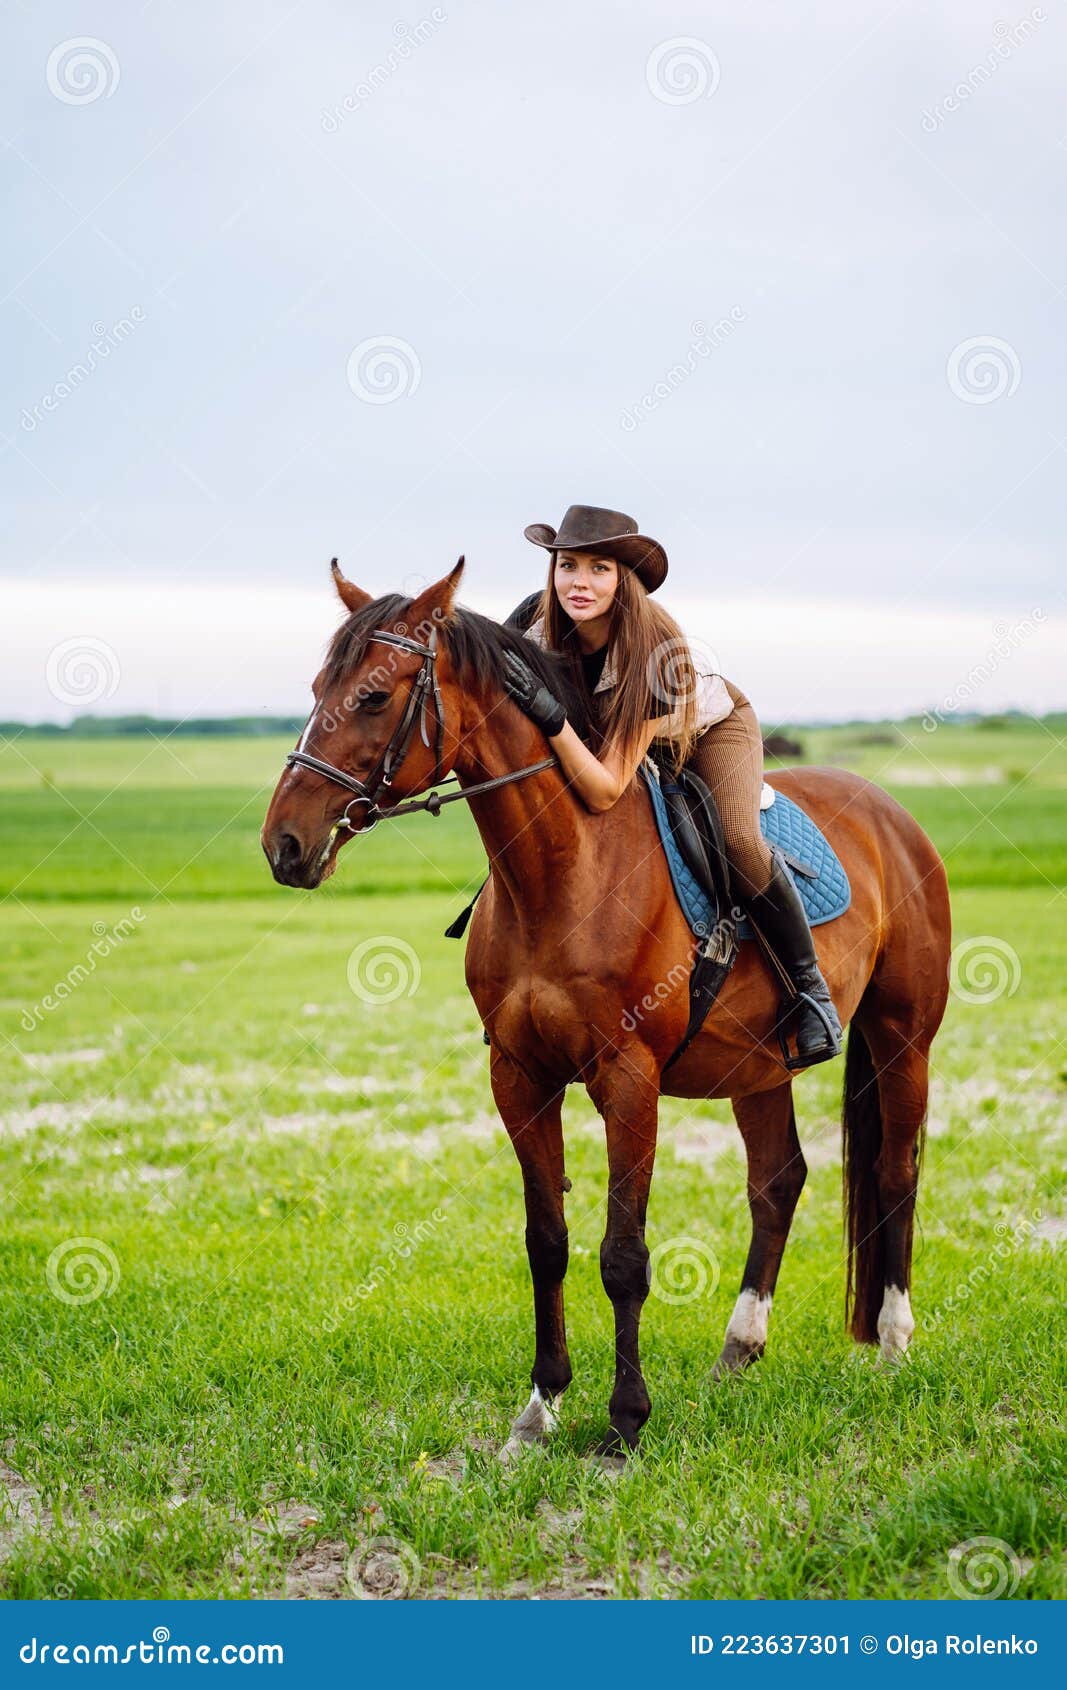 Young Woman Dressed in Riding Clothes and Hat Riding Brown Horse in Green  Field Stock Image - Image of nature, farm: 223637301